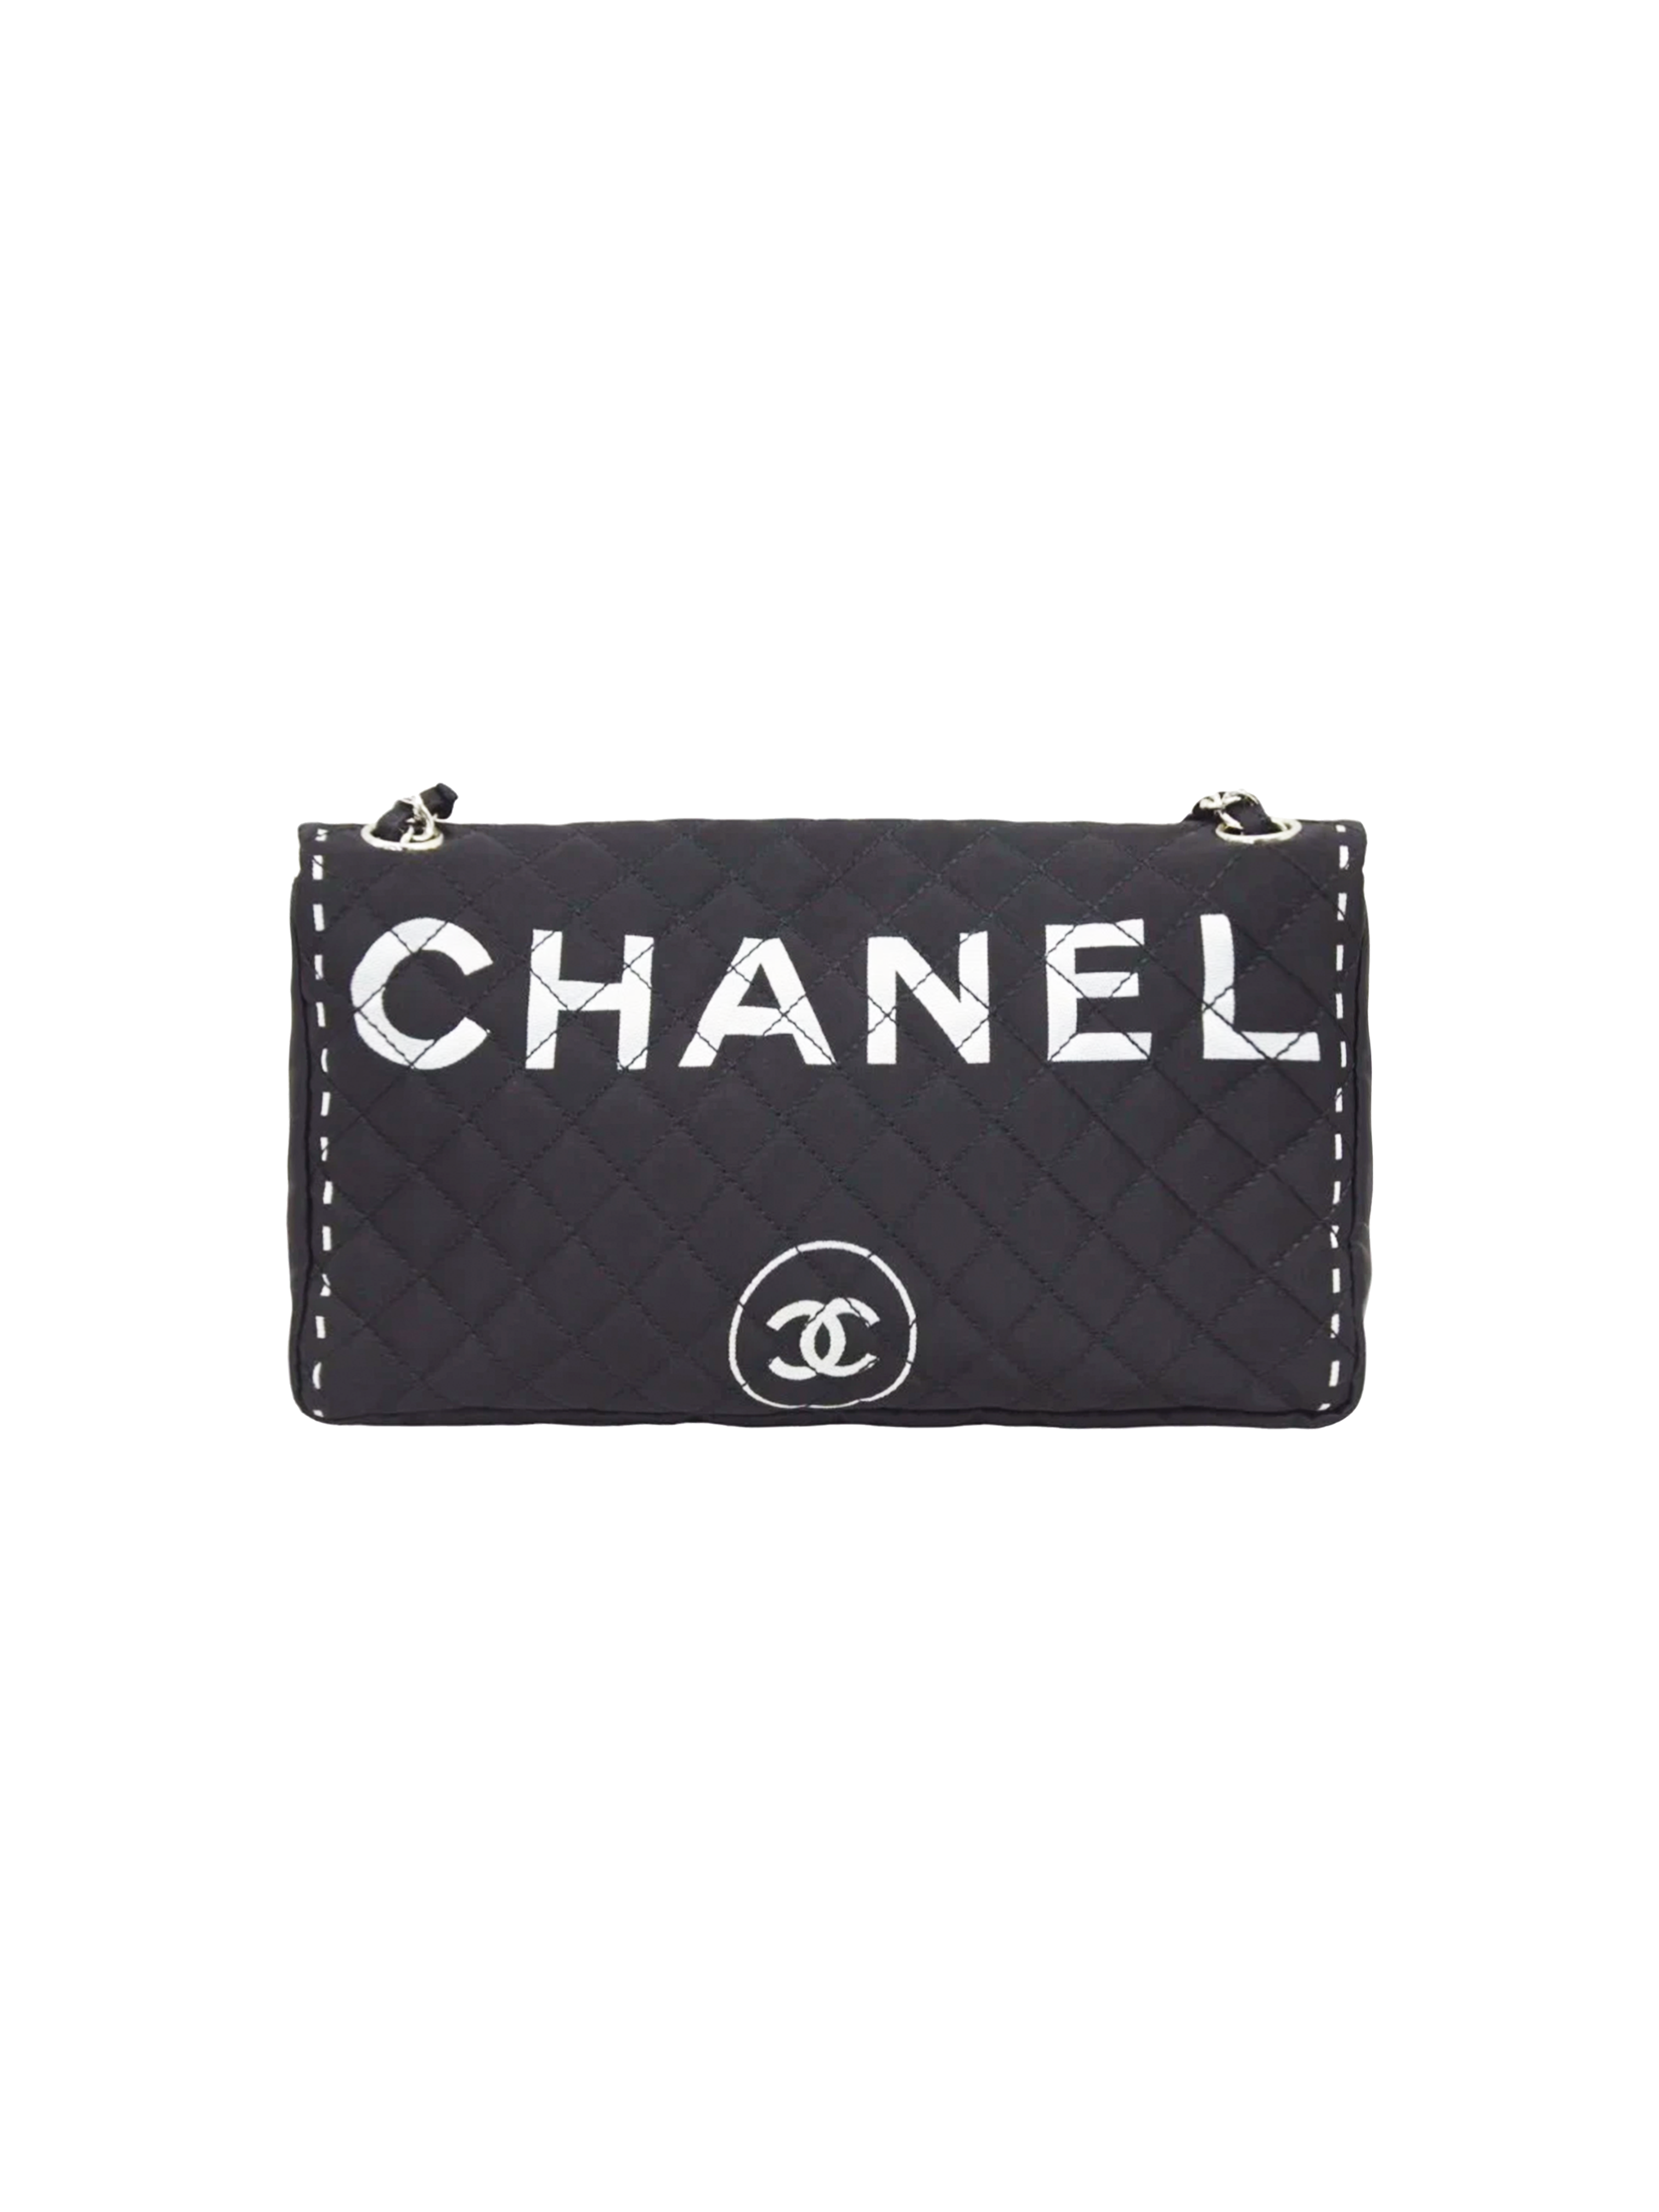 Chanel Classic Flap Supermodel Flat Top Super Rare Quilted Black Patent  Leather Crossbody Bag